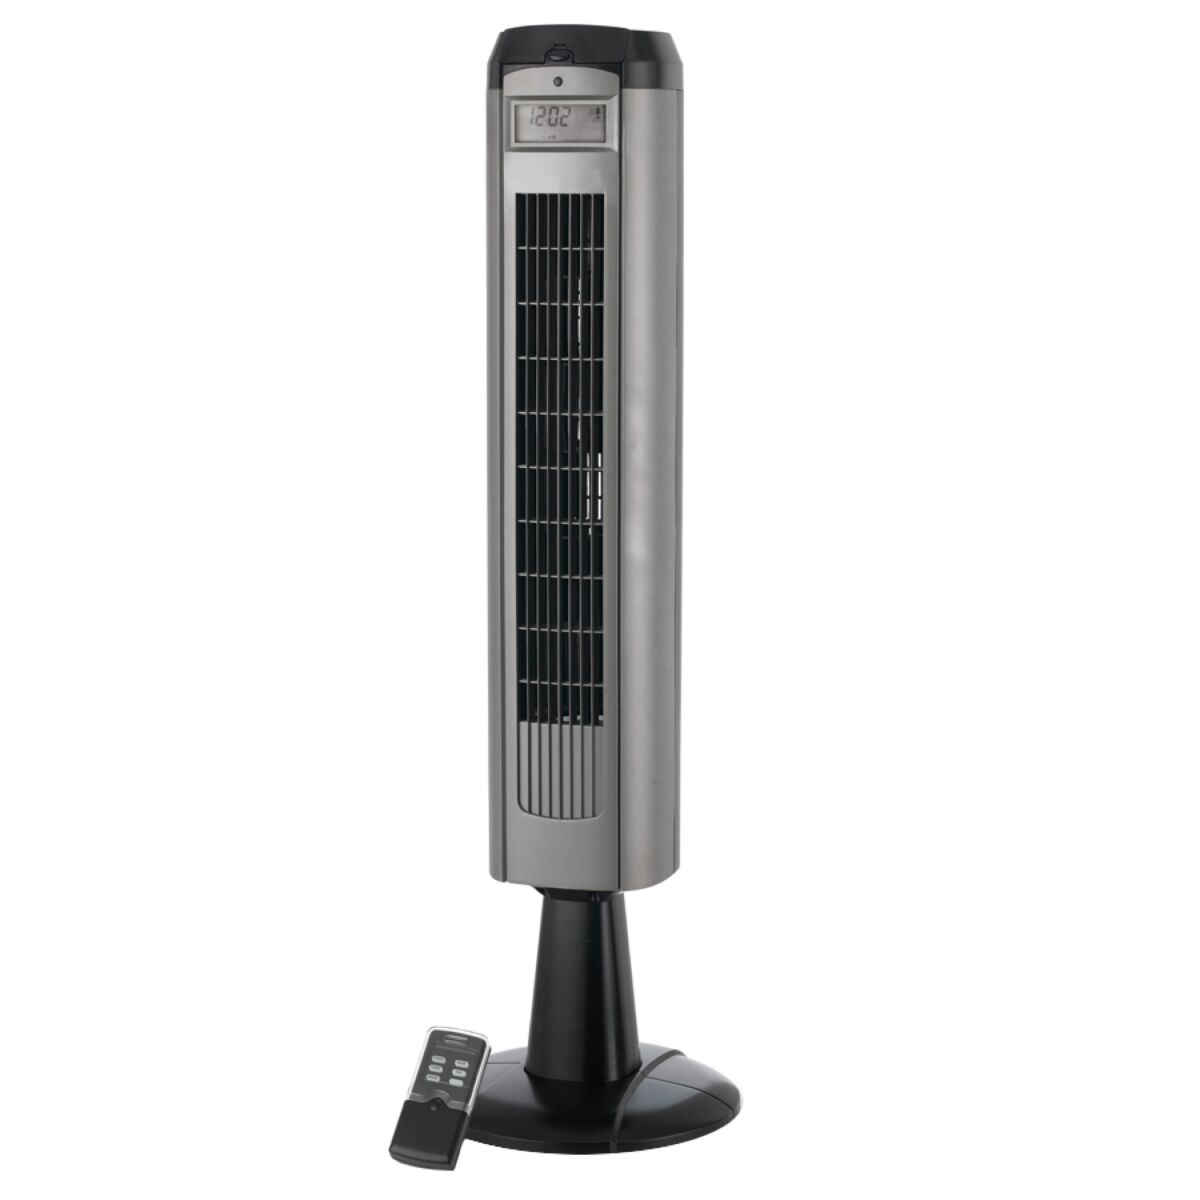 Robert Dyas 37 Graphite Tower Fan With Remote Control intended for proportions 1200 X 1200